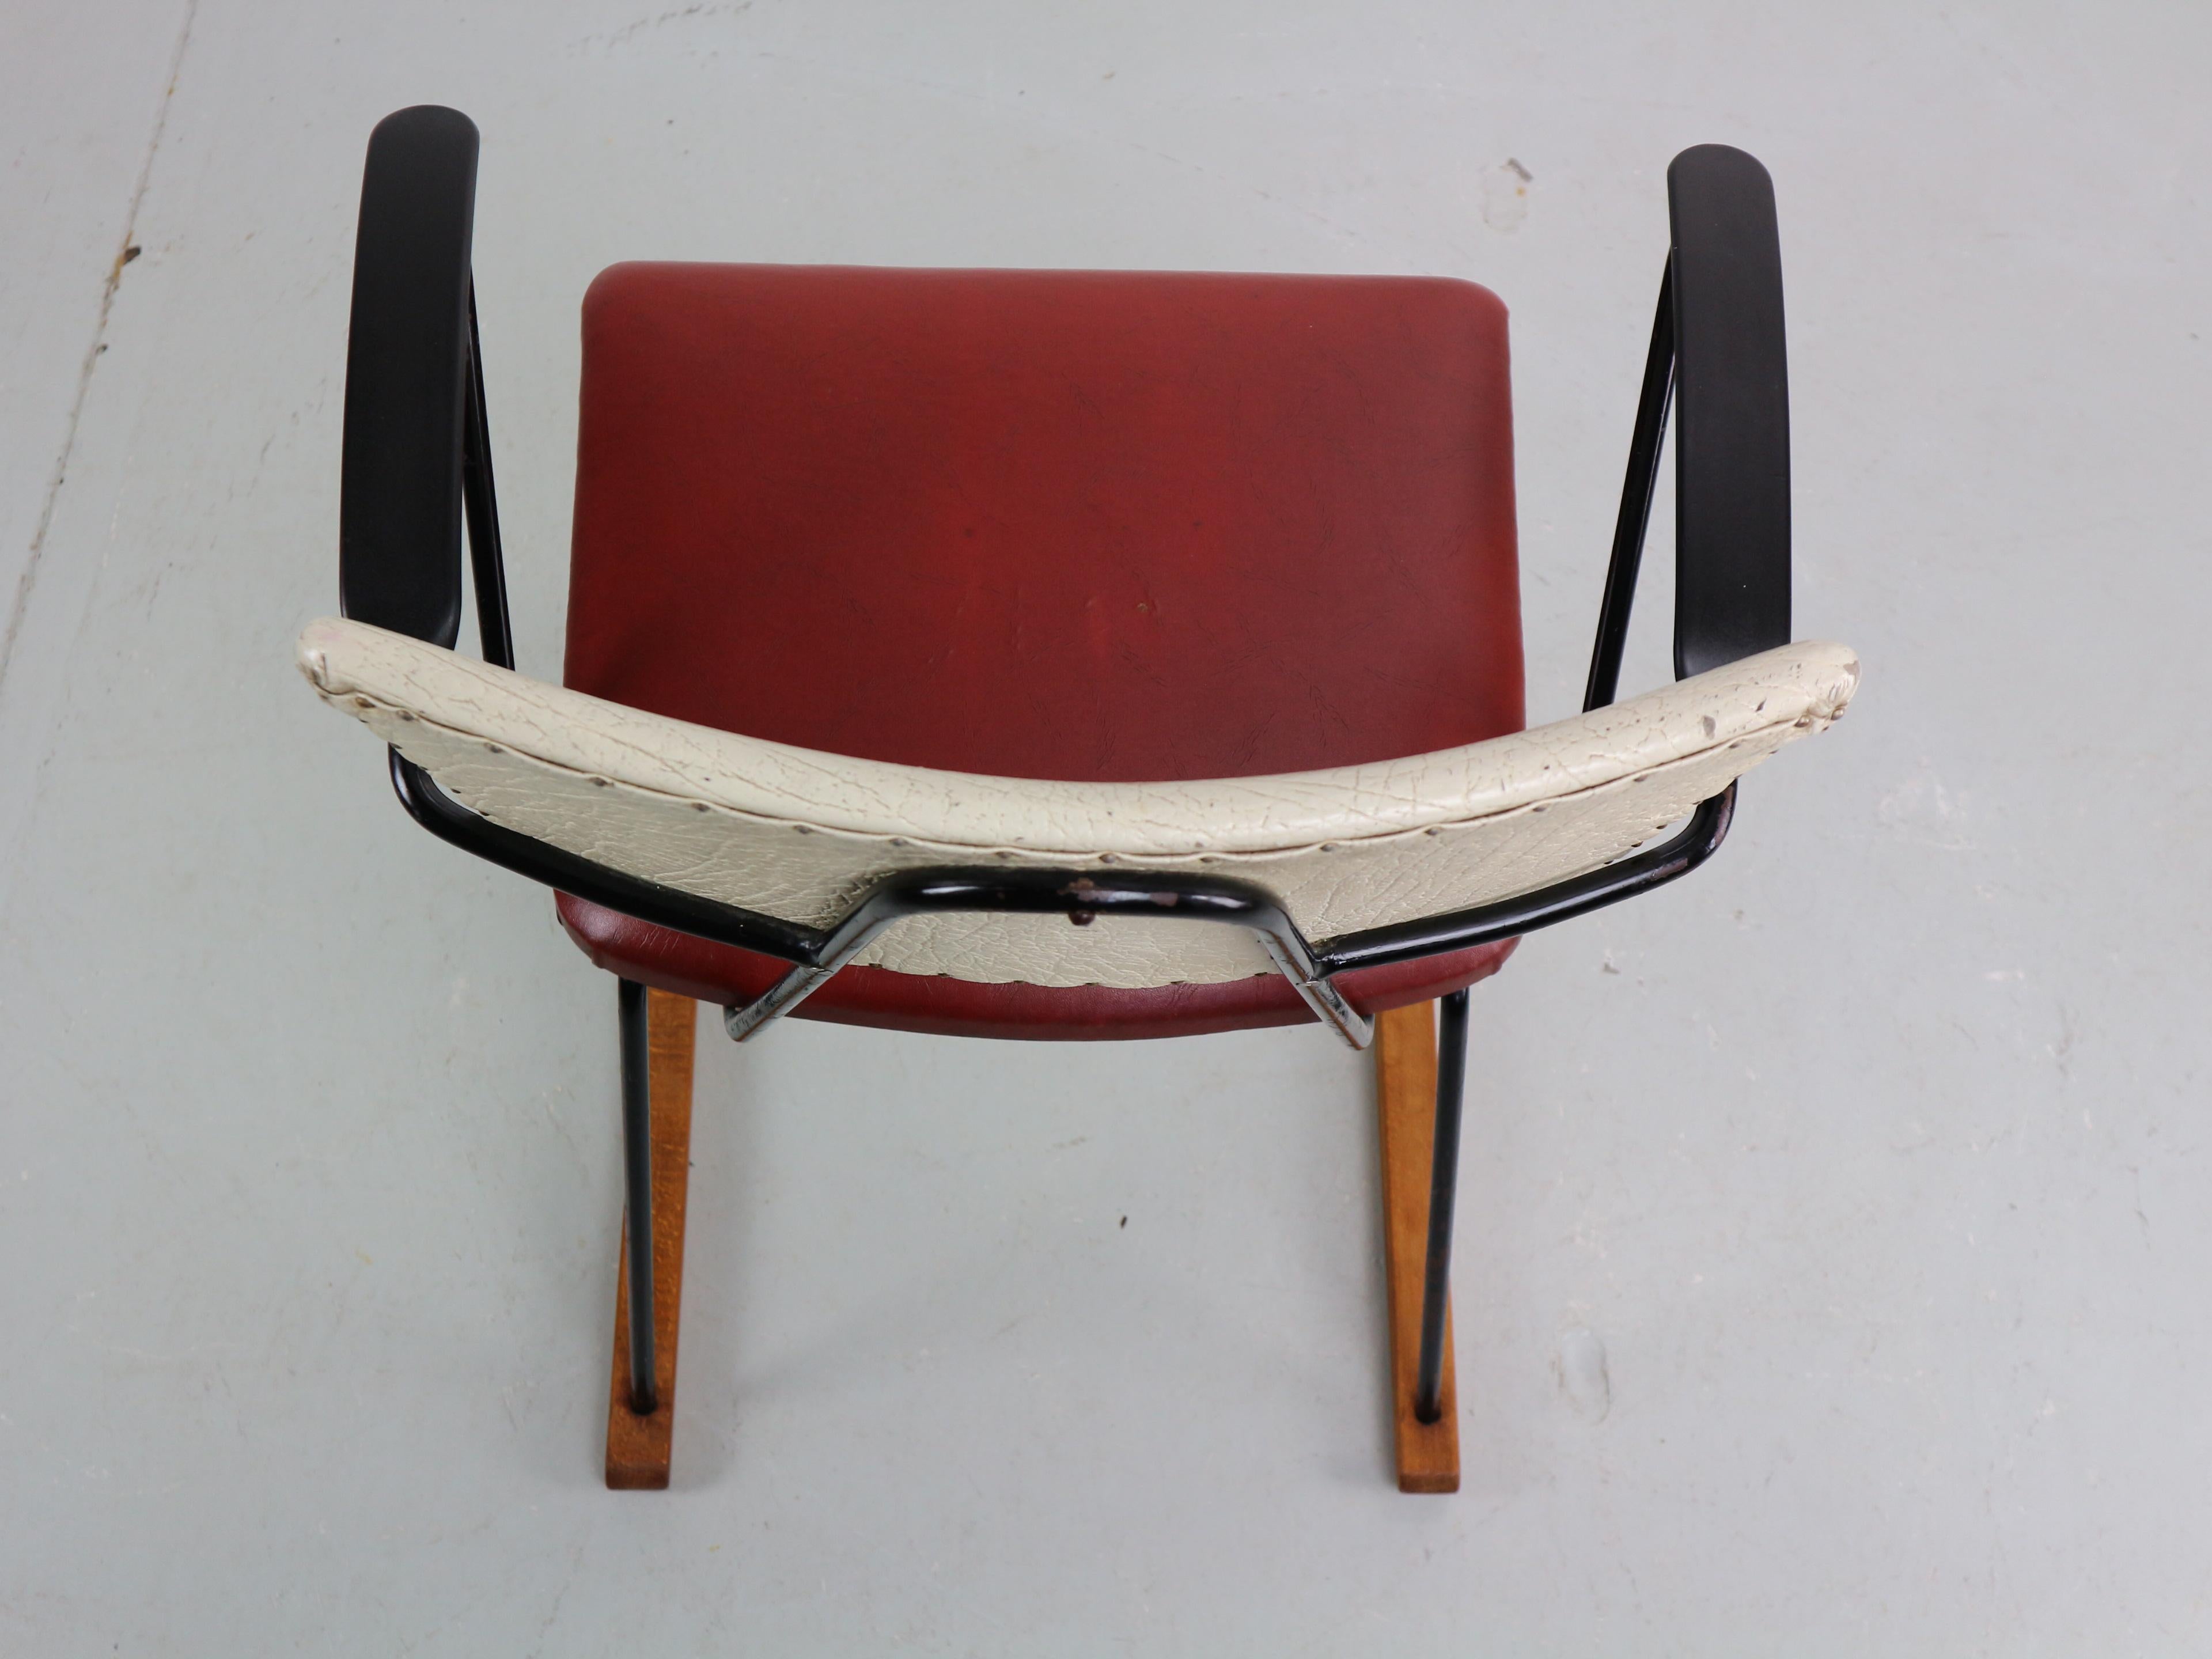  Kembo Rocking by Wh Gispen, 1950s For Sale 9